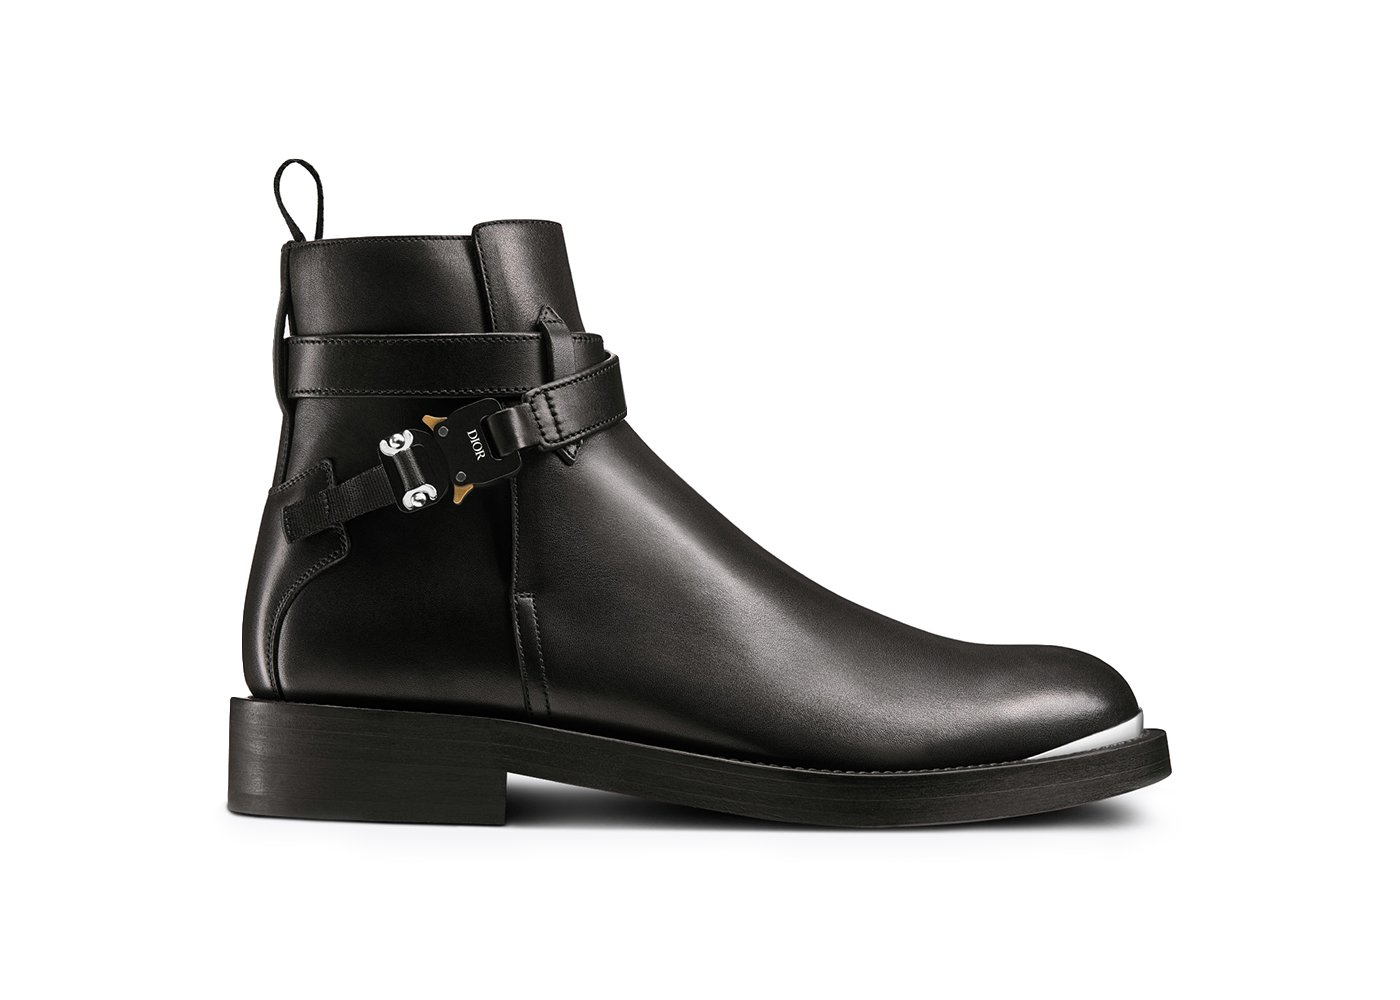 sneakers Dior Evidence Ankle Boot Black Smooth Calfskin